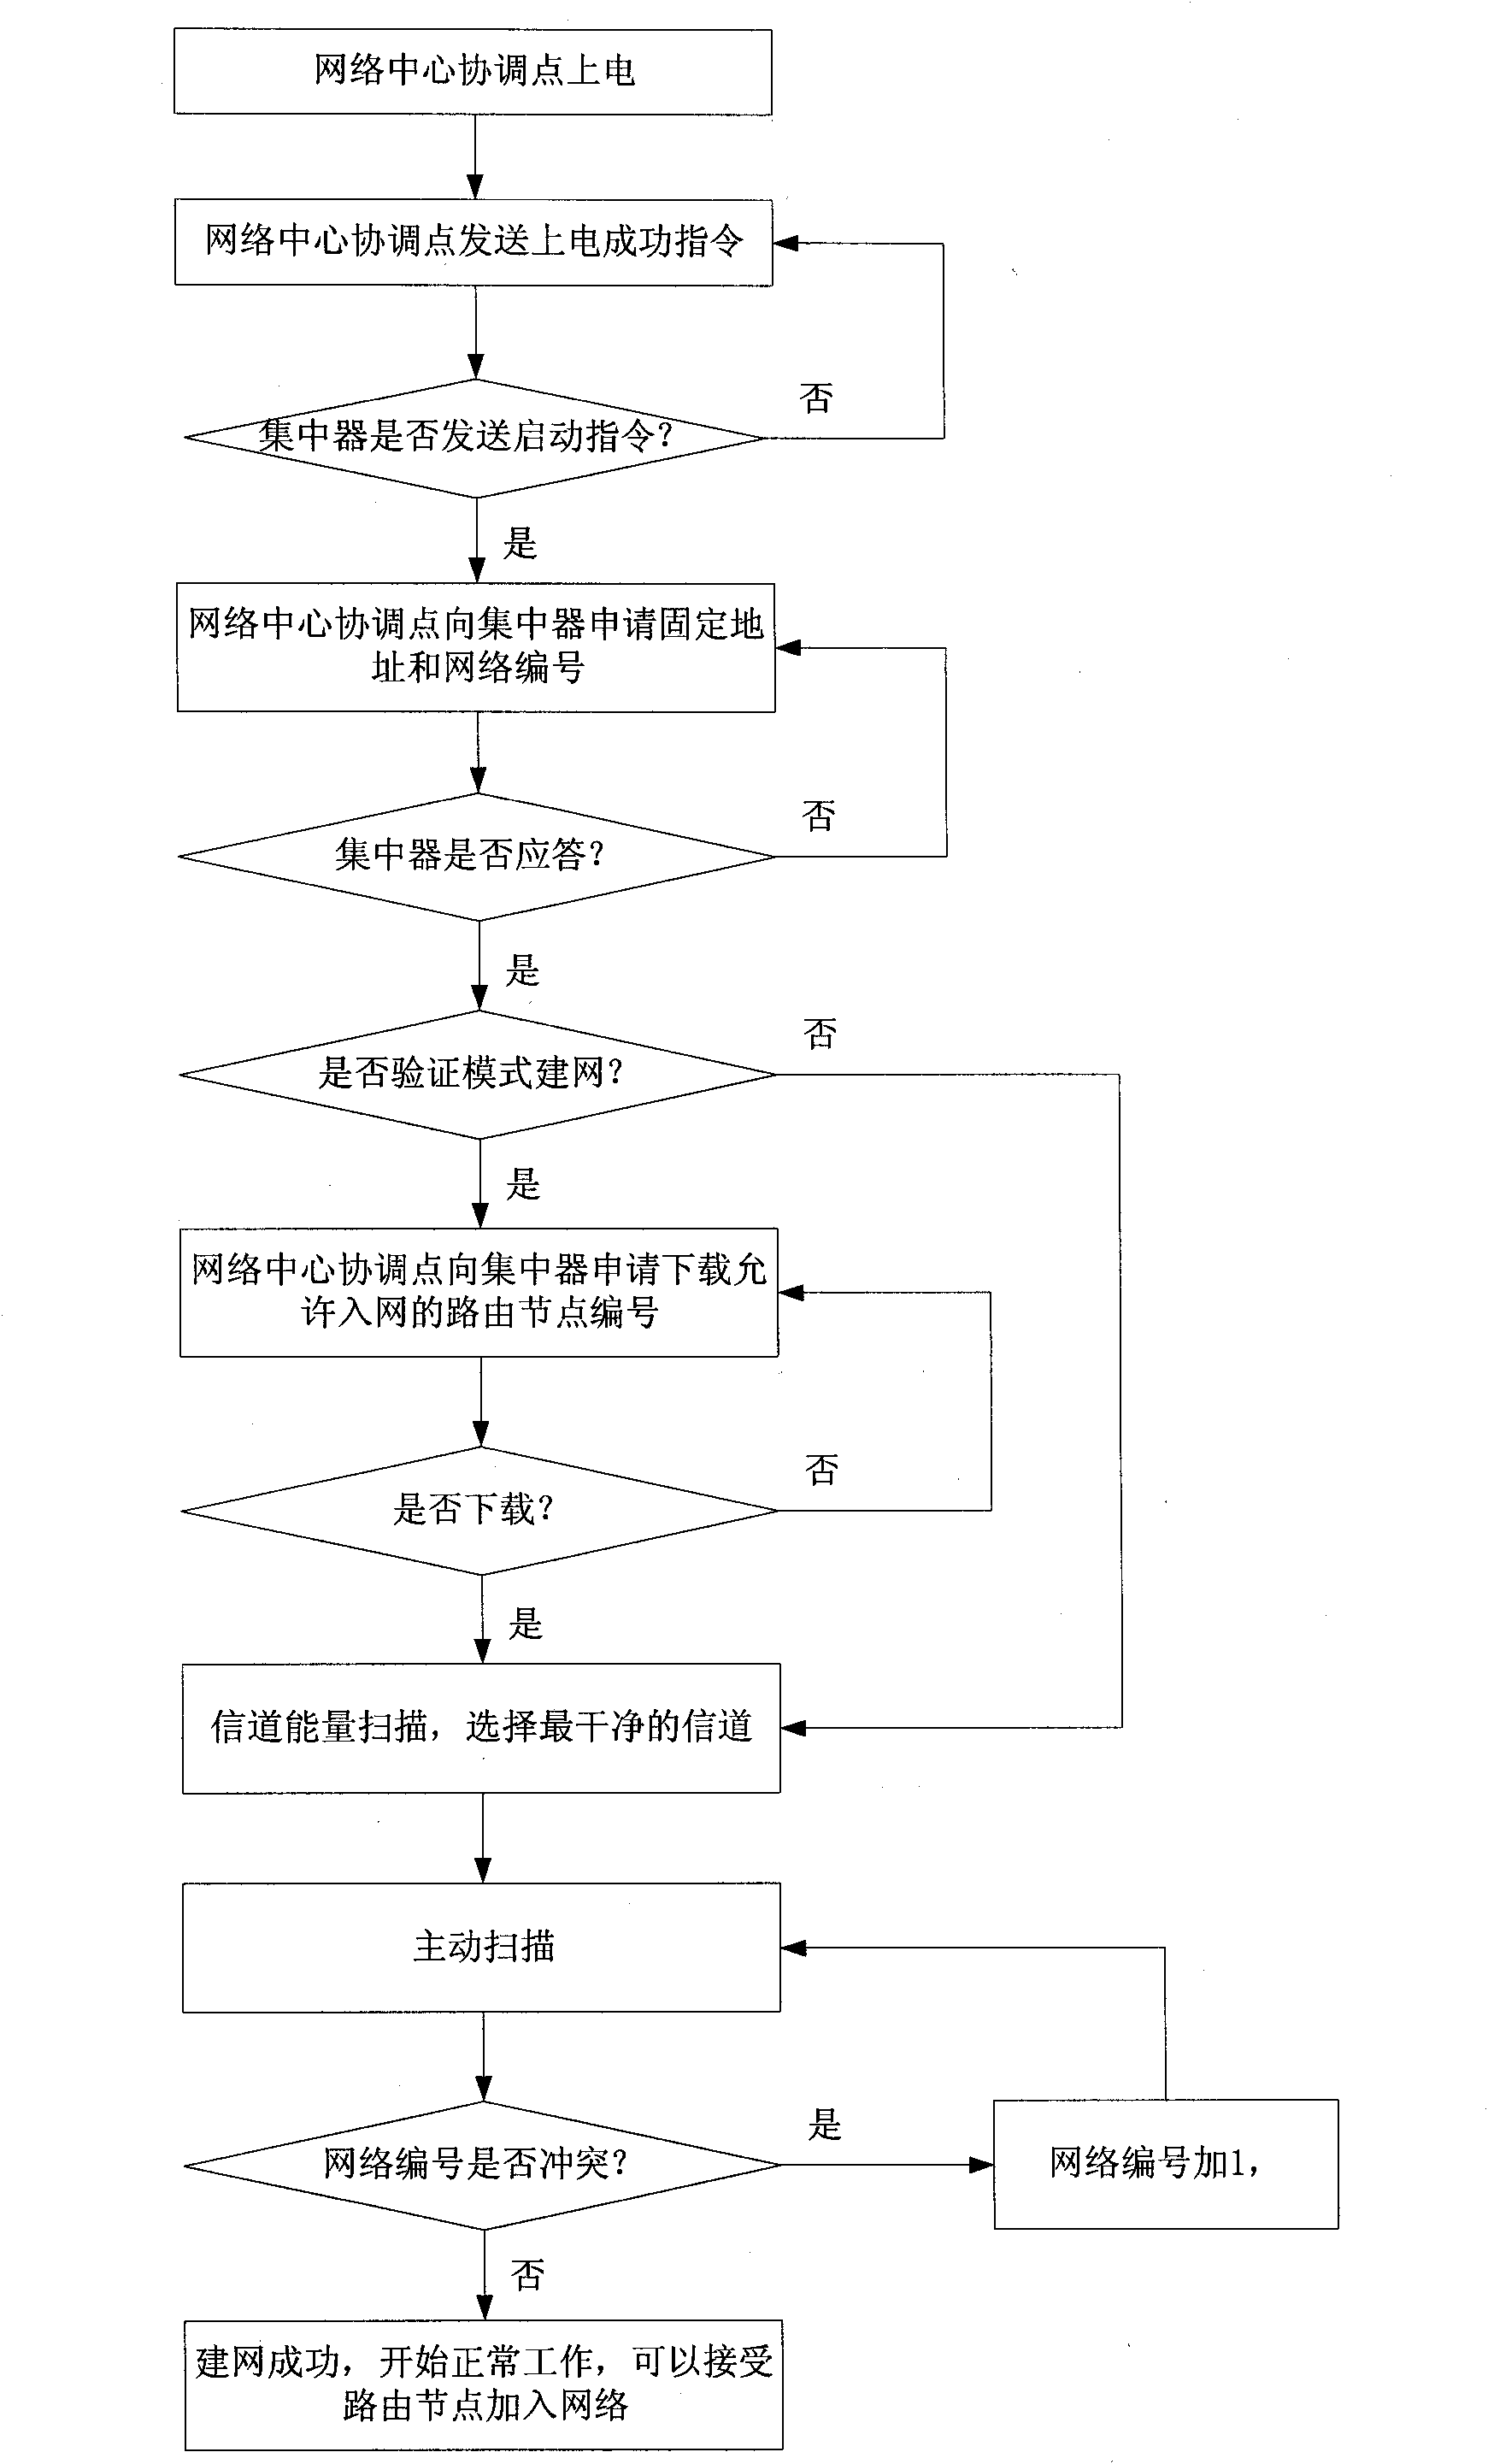 Self-networking method for wireless routing Internet of things